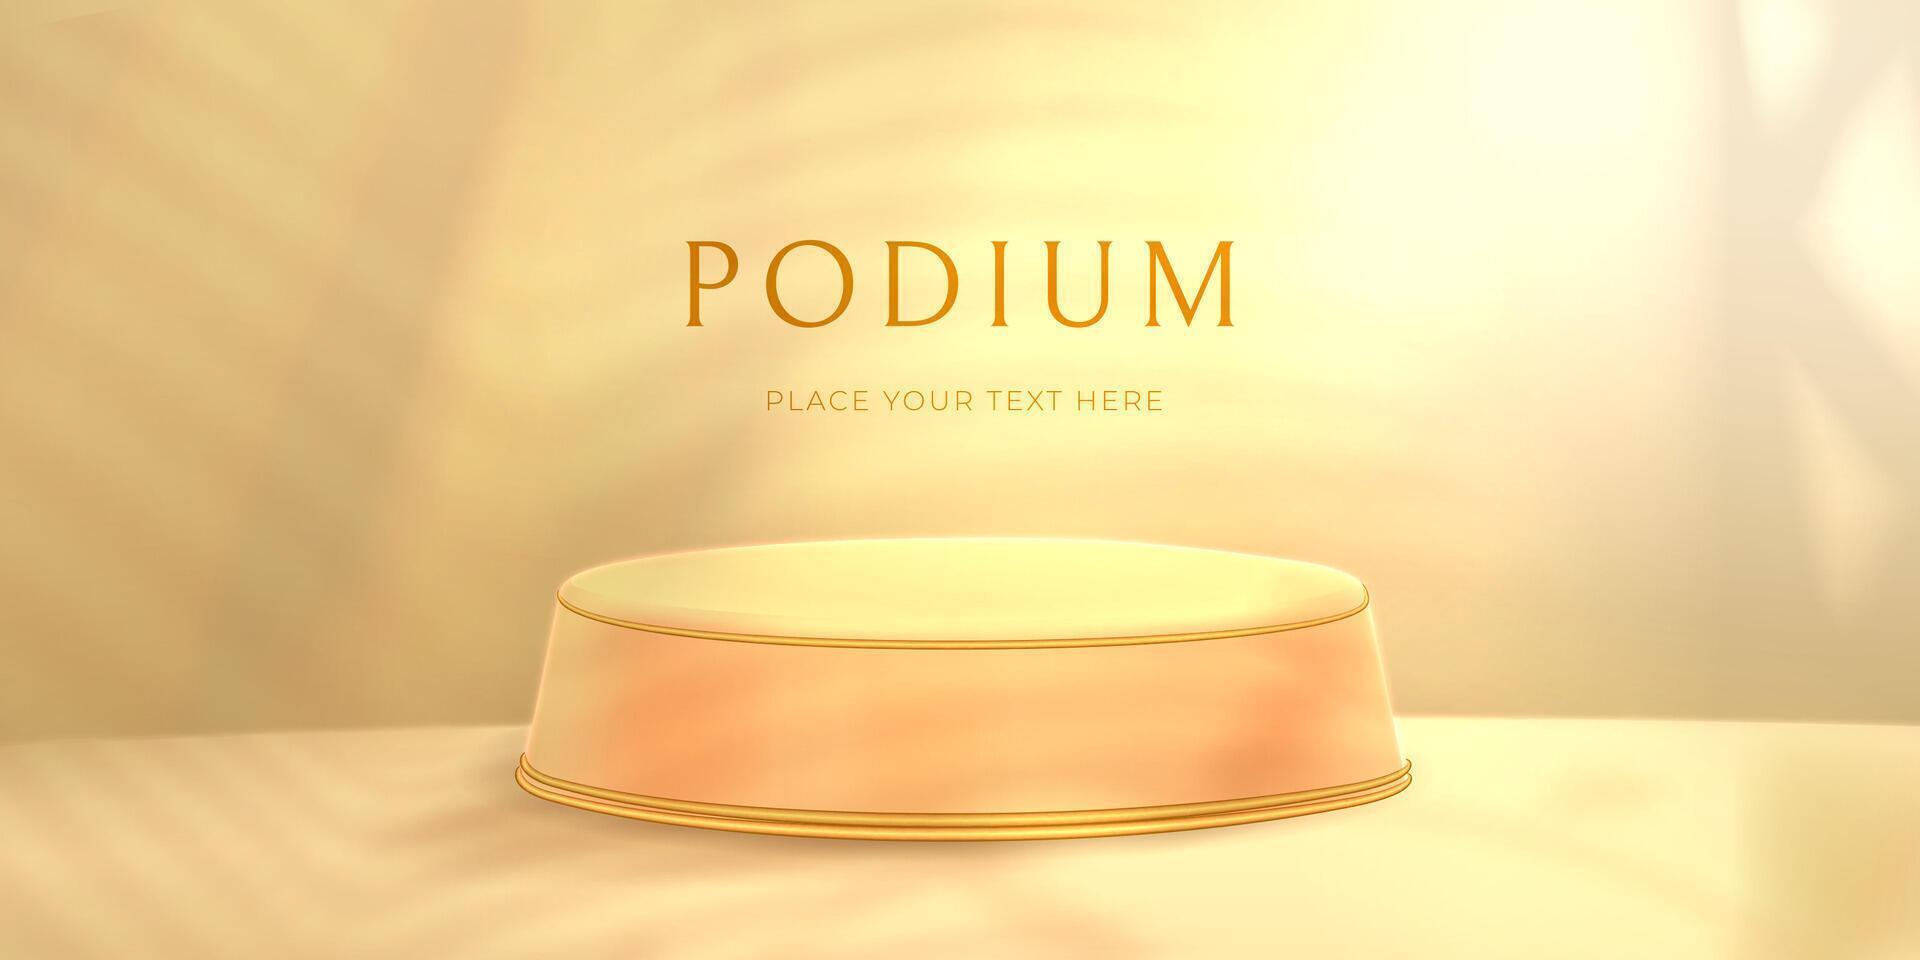 Round podium or pedestal with palm leaves background. Beige product display platform with golden decor. Studio showroom scene with tropical leaf shadow on wall from sunlight. Realistic 3d vector